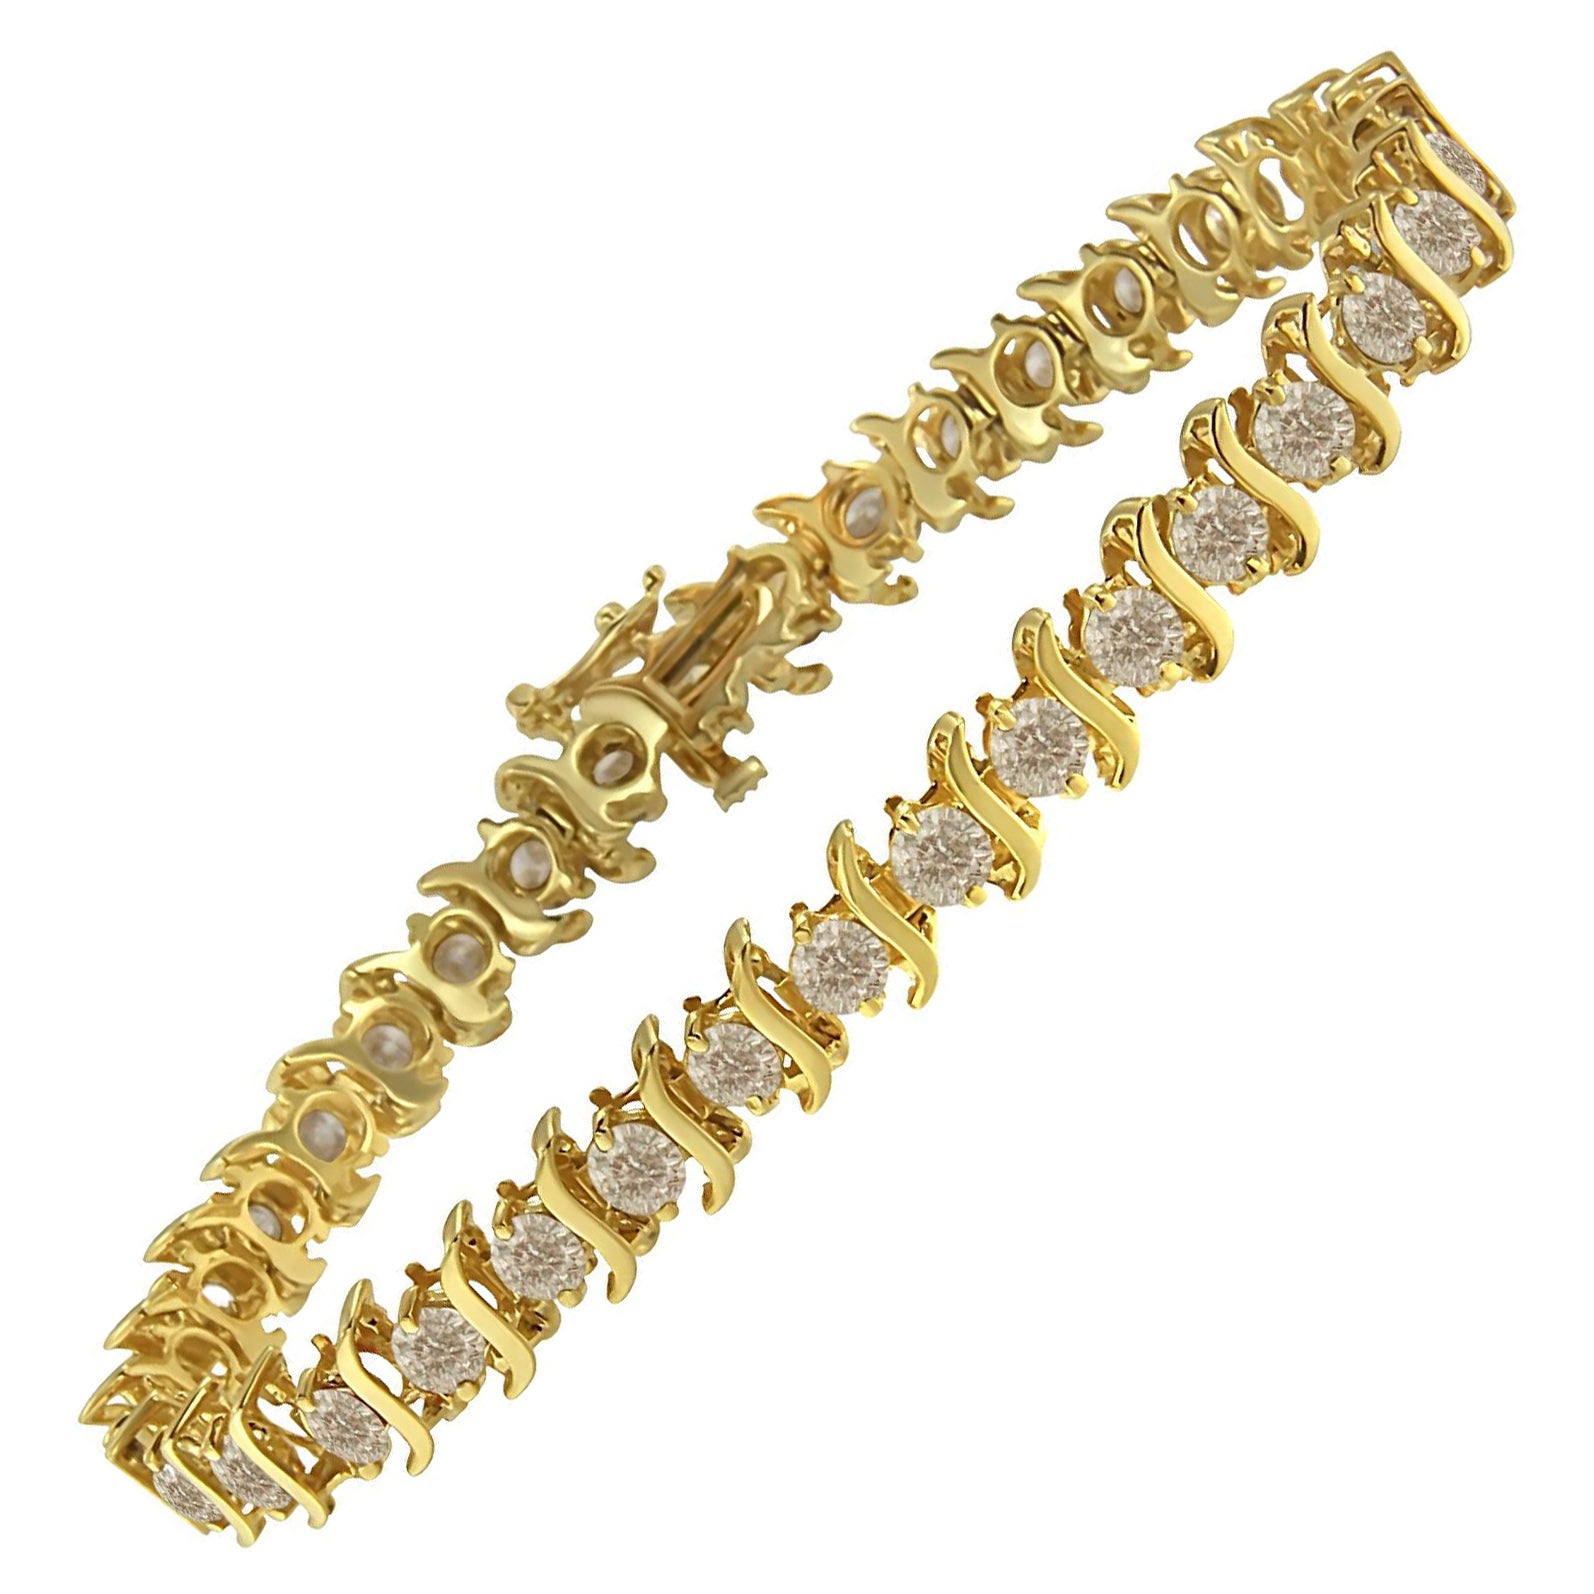 Yellow Gold-Plated Sterling Silver 7.0 Carat Diamond "S" Link Tennis Bracelet